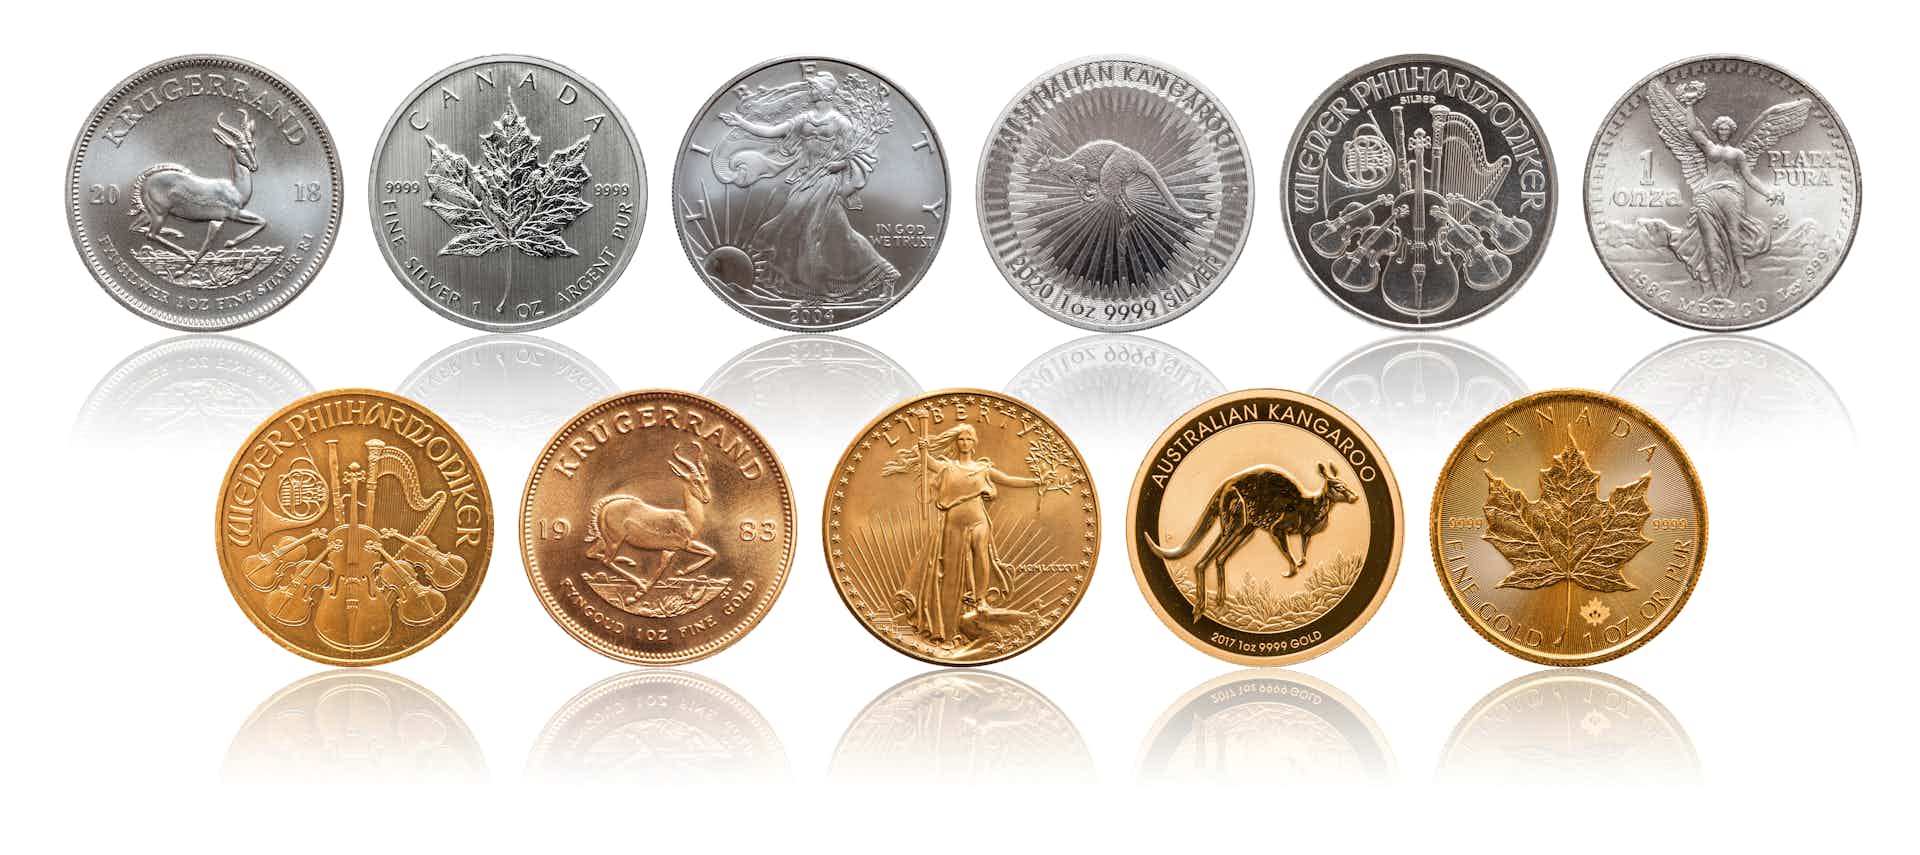 Types of coins that we buy in gold and silver bullion